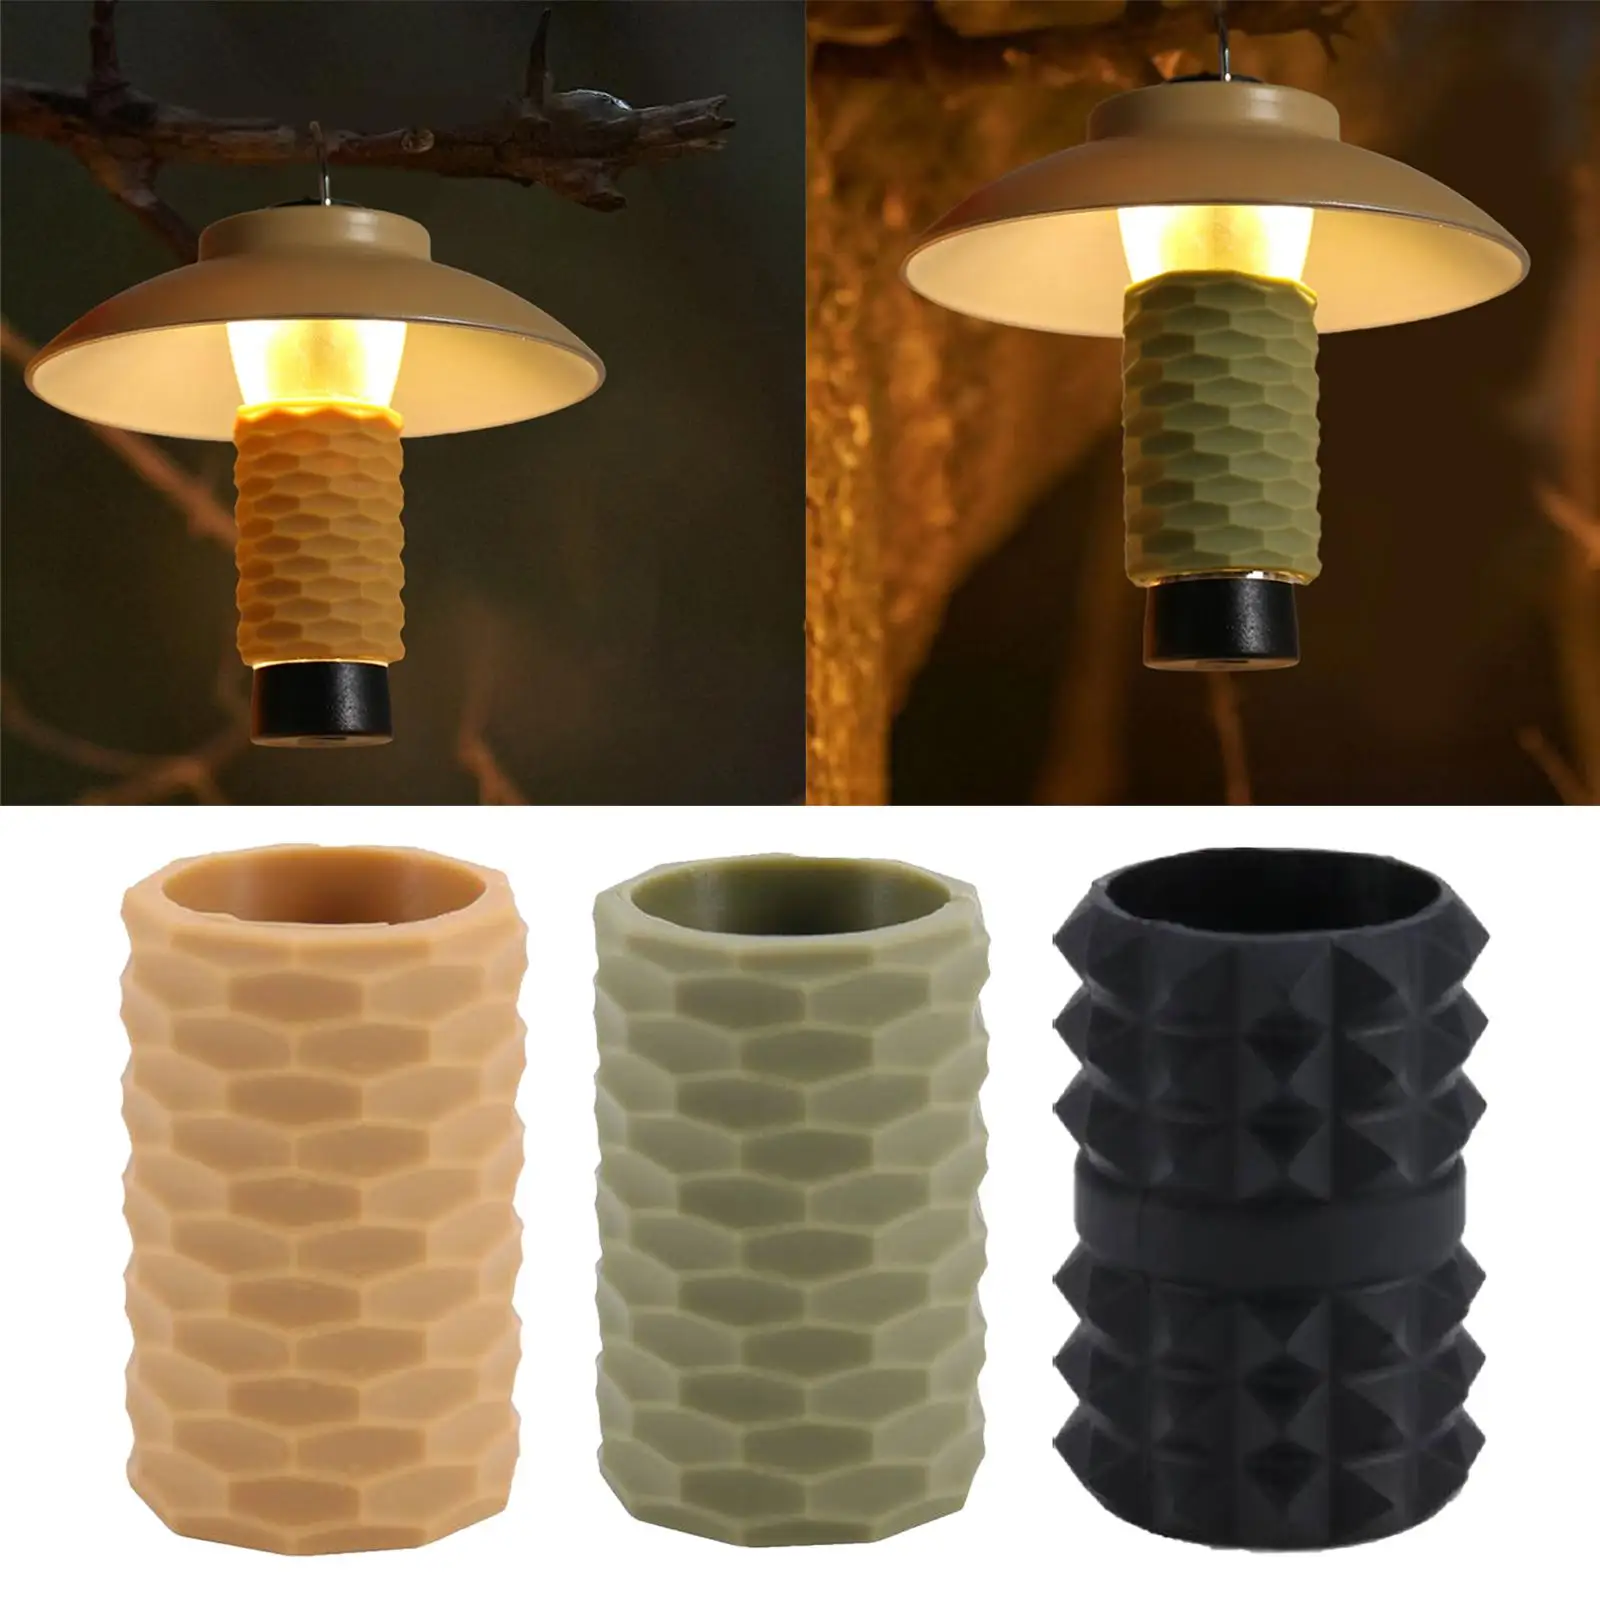 Lamp Sleeve Cover Camping Lights Cover Flashlight Holder Accessories Protective Torch Lantern Lampshade for Fishing Backpacking